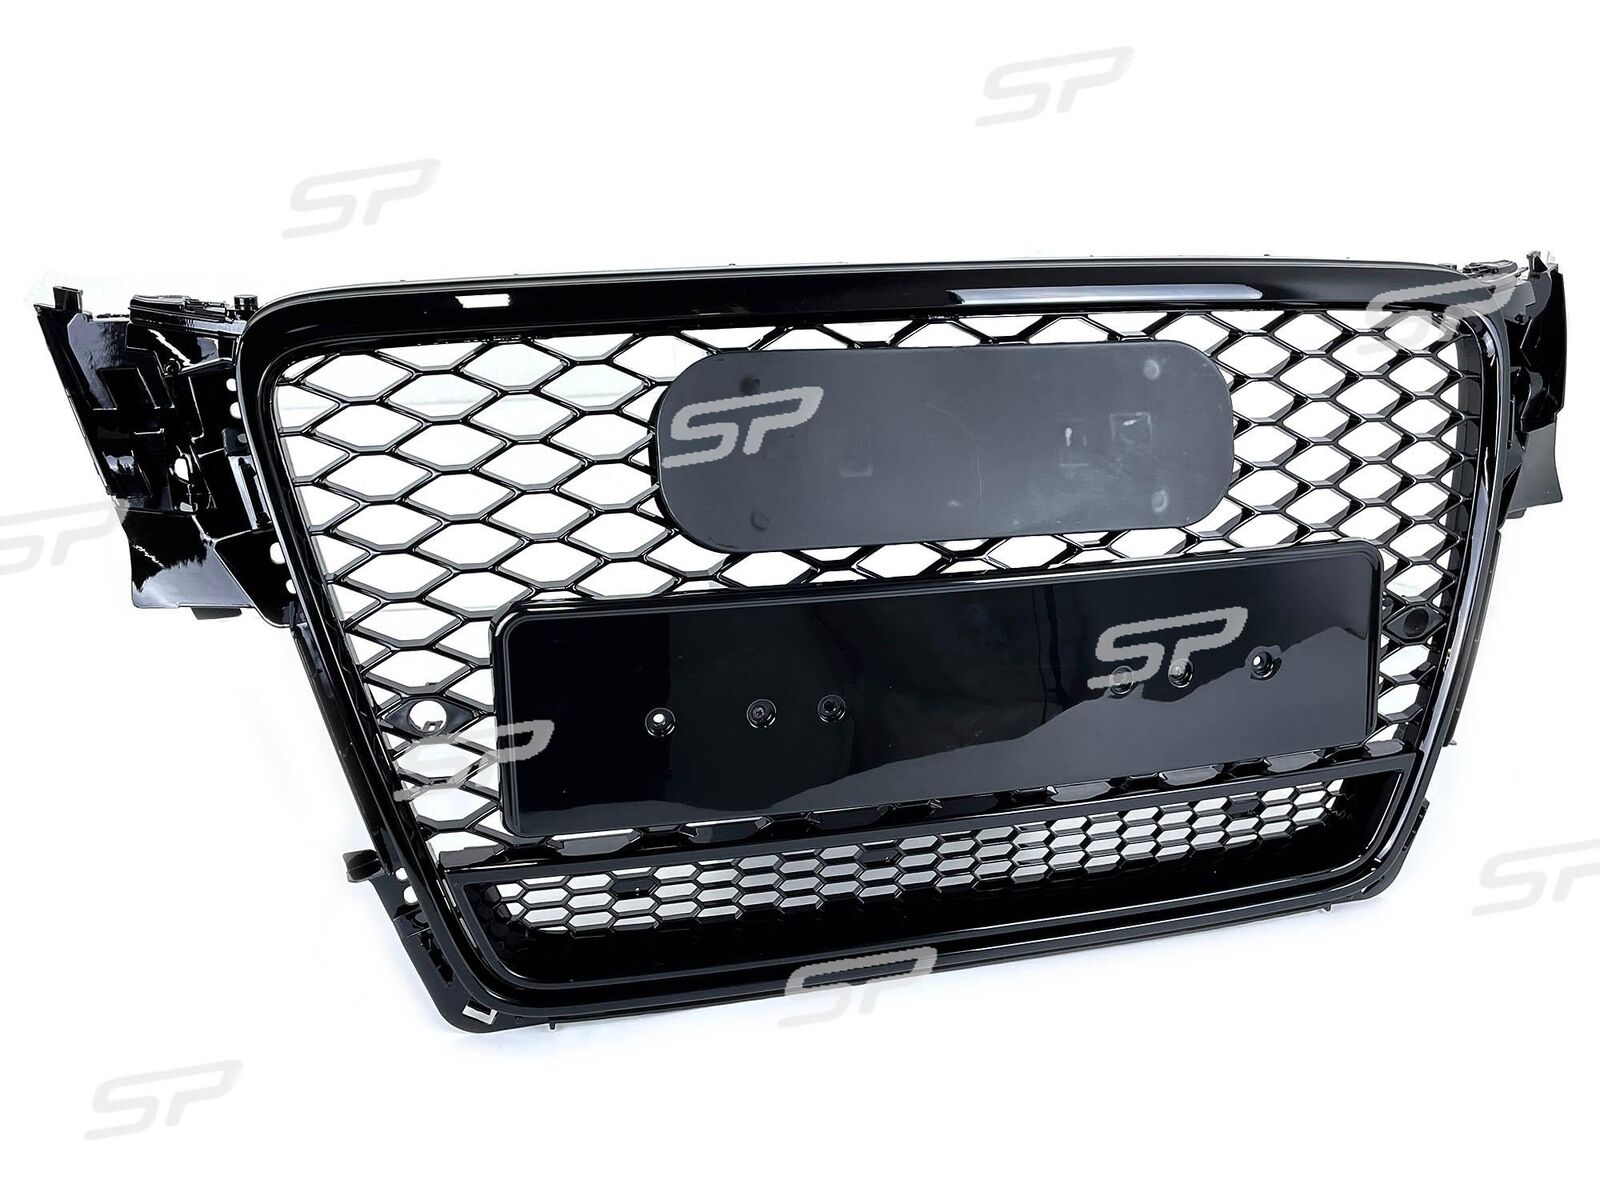 RS4 Style Grill Wabengrill Kühlergrill für AUDI A4 S4 B8 8K Limo Avant 2007-2011